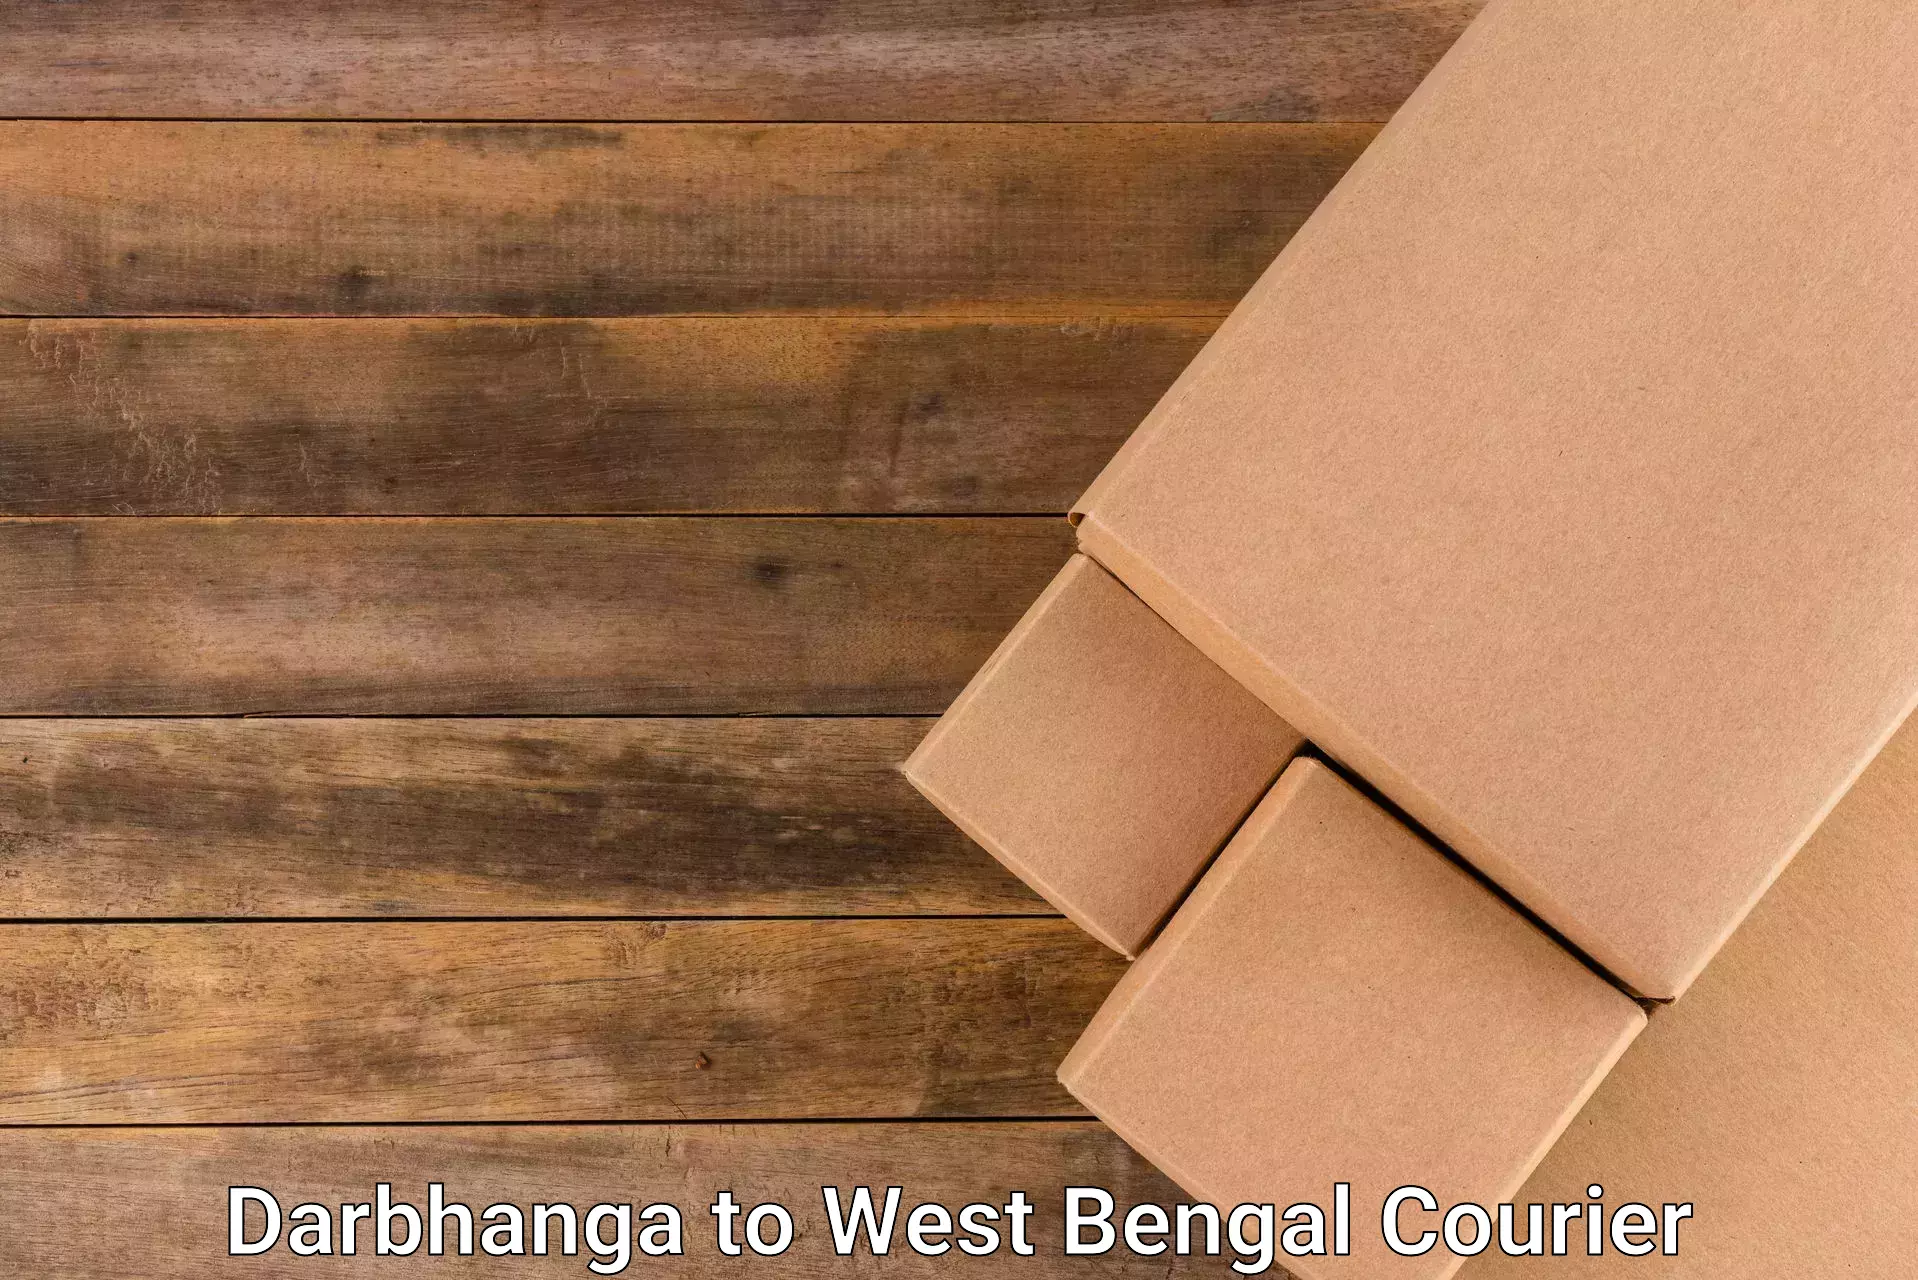 Express mail solutions Darbhanga to West Bengal